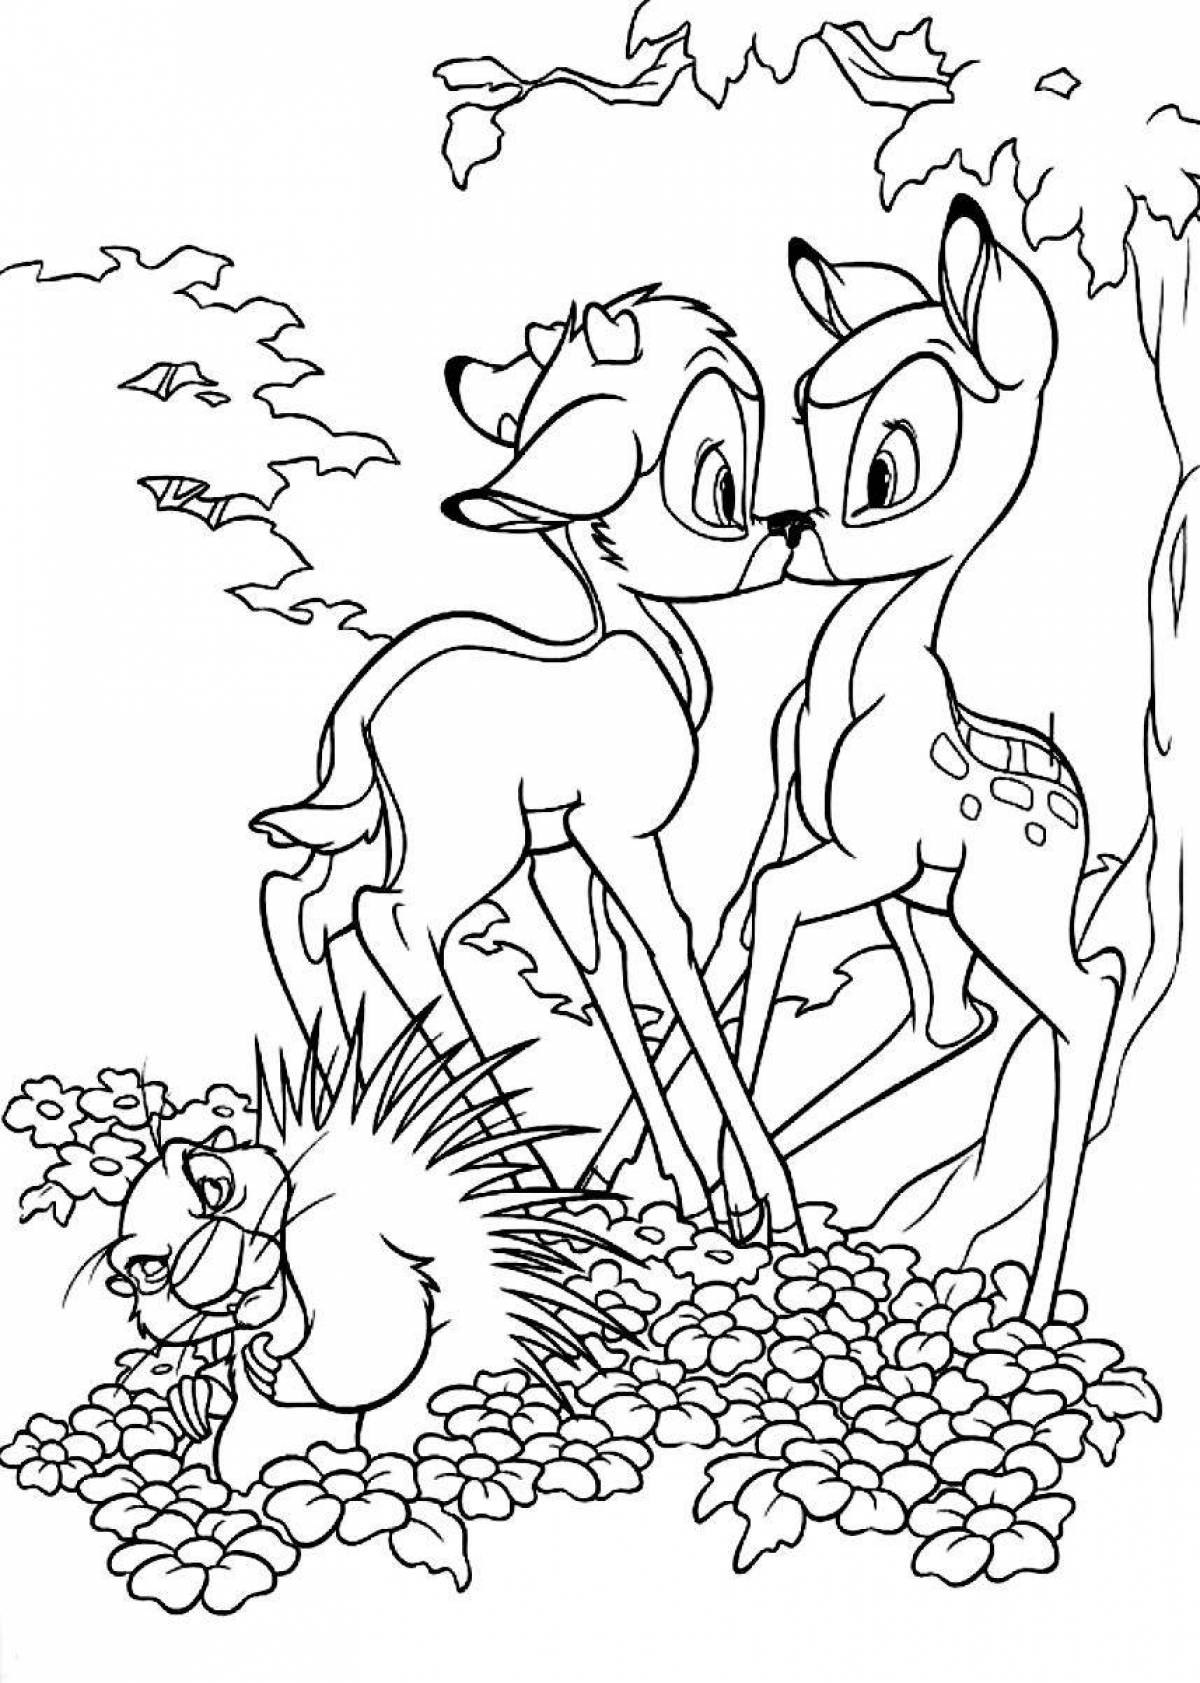 Creative bambi coloring for kids